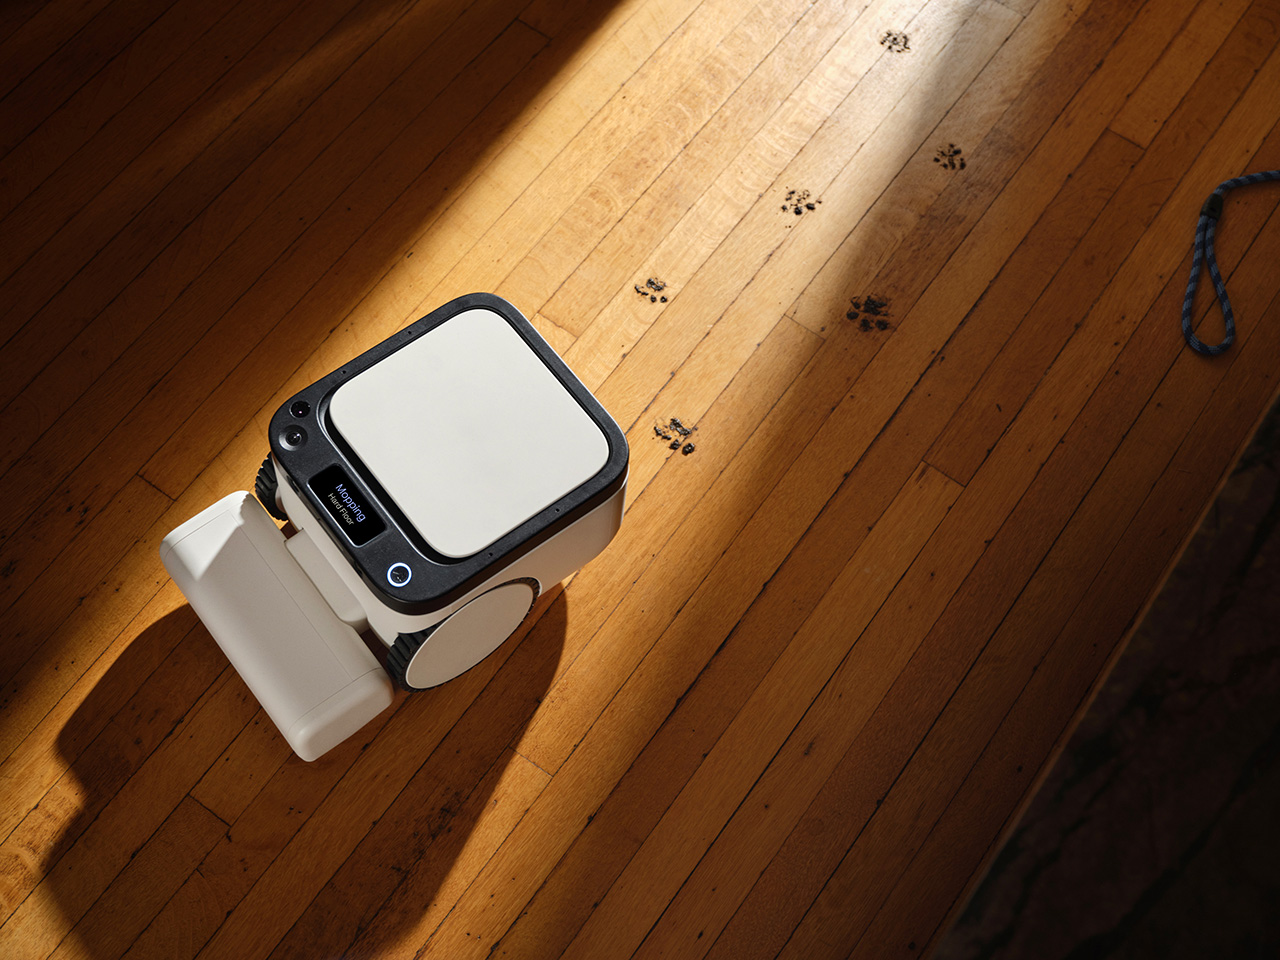 Matic Robot Vacuum Collects Dust but Not Your Personal Data